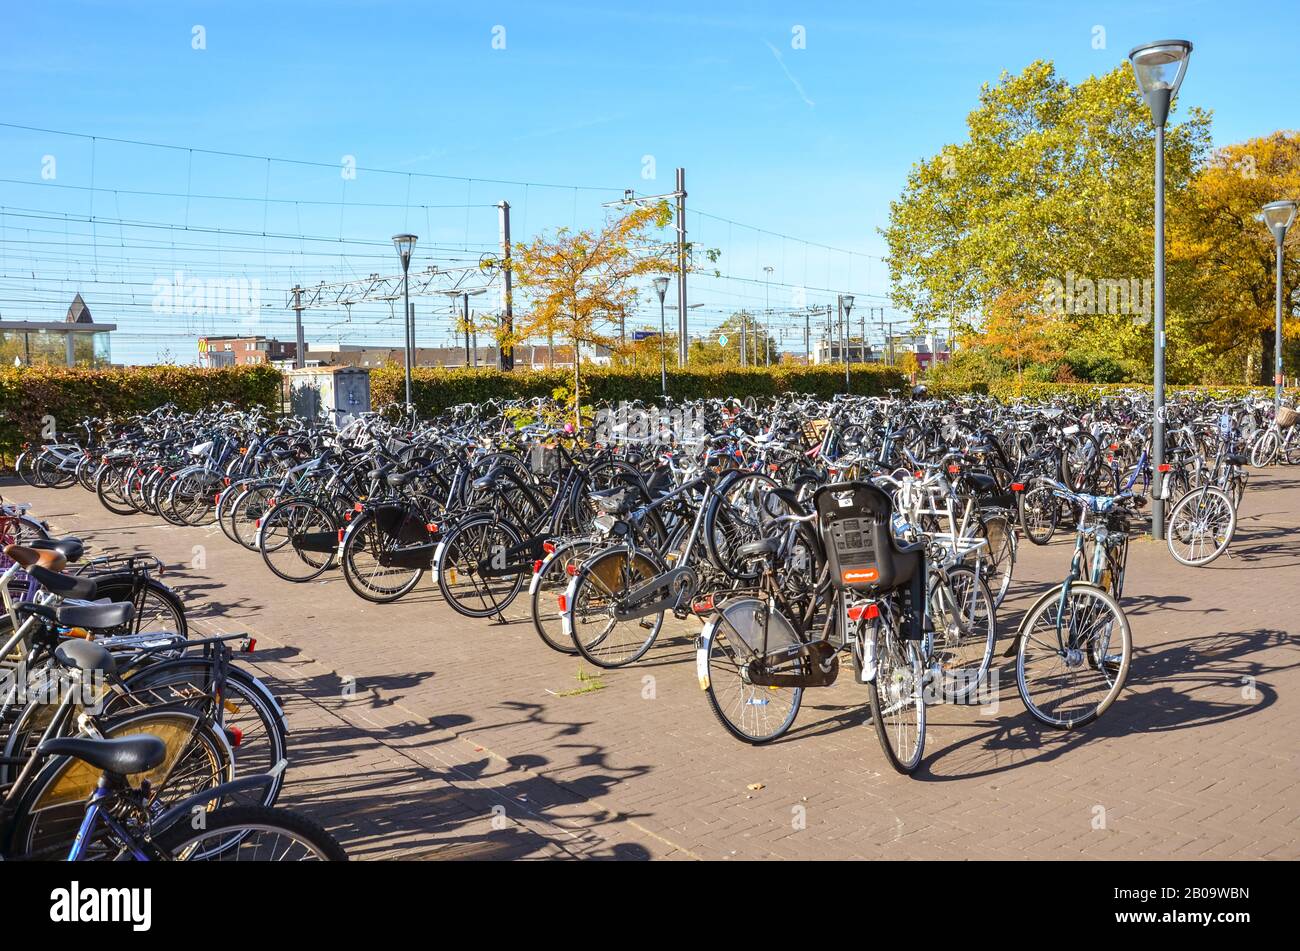 Venlo, Limburg, Netherlands - October 13, 2018: Rows of parked bicycles in the Dutch city close to the main train station. City biking. Eco-friendly means of transport. Horizontal photo. Stock Photo